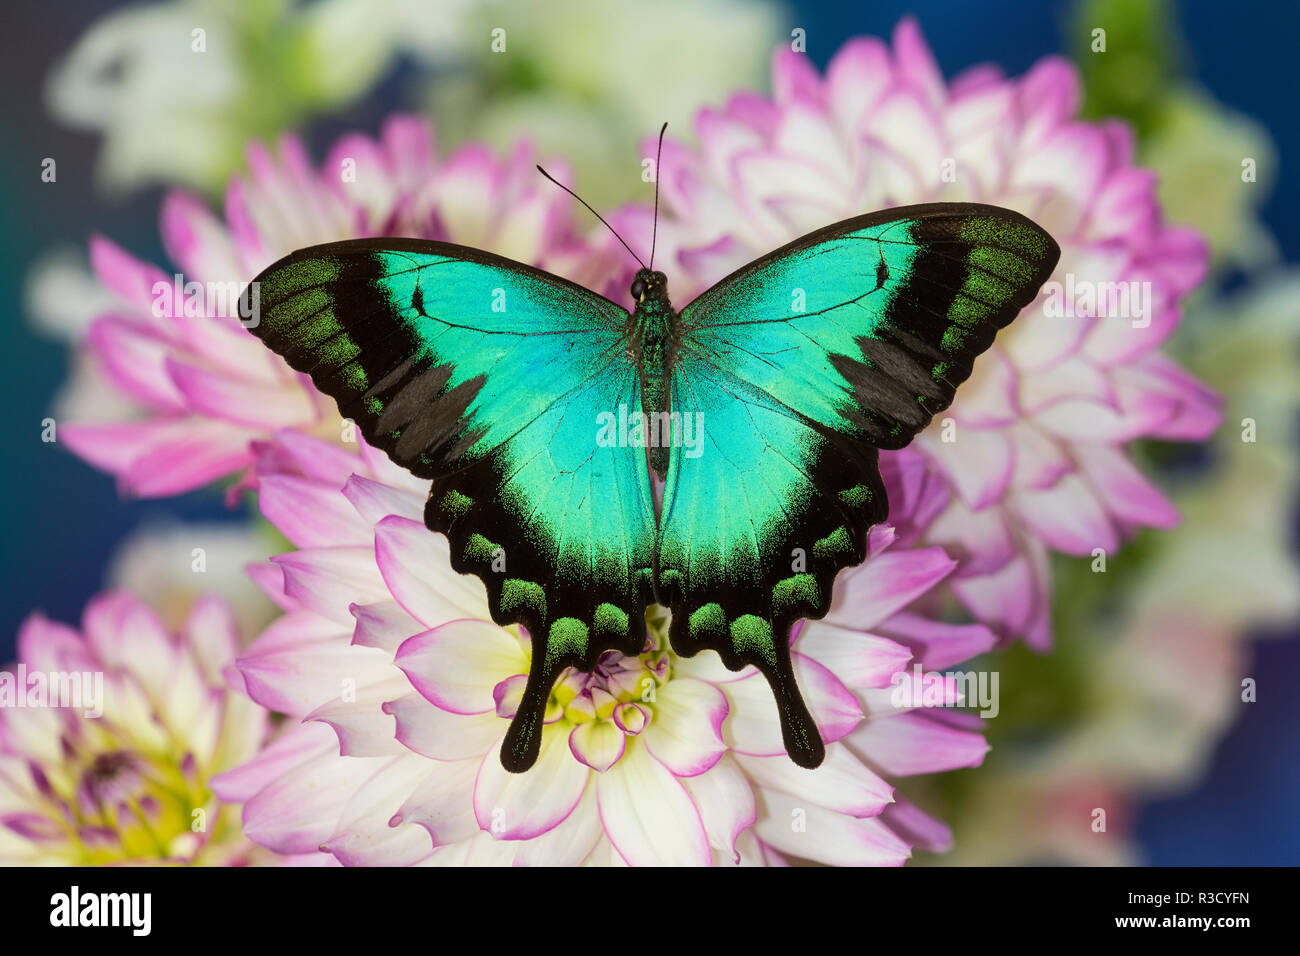 Tropical Swallowtail Butterfly, Papilio larquinianus on pink and white Dahlia Stock Photo